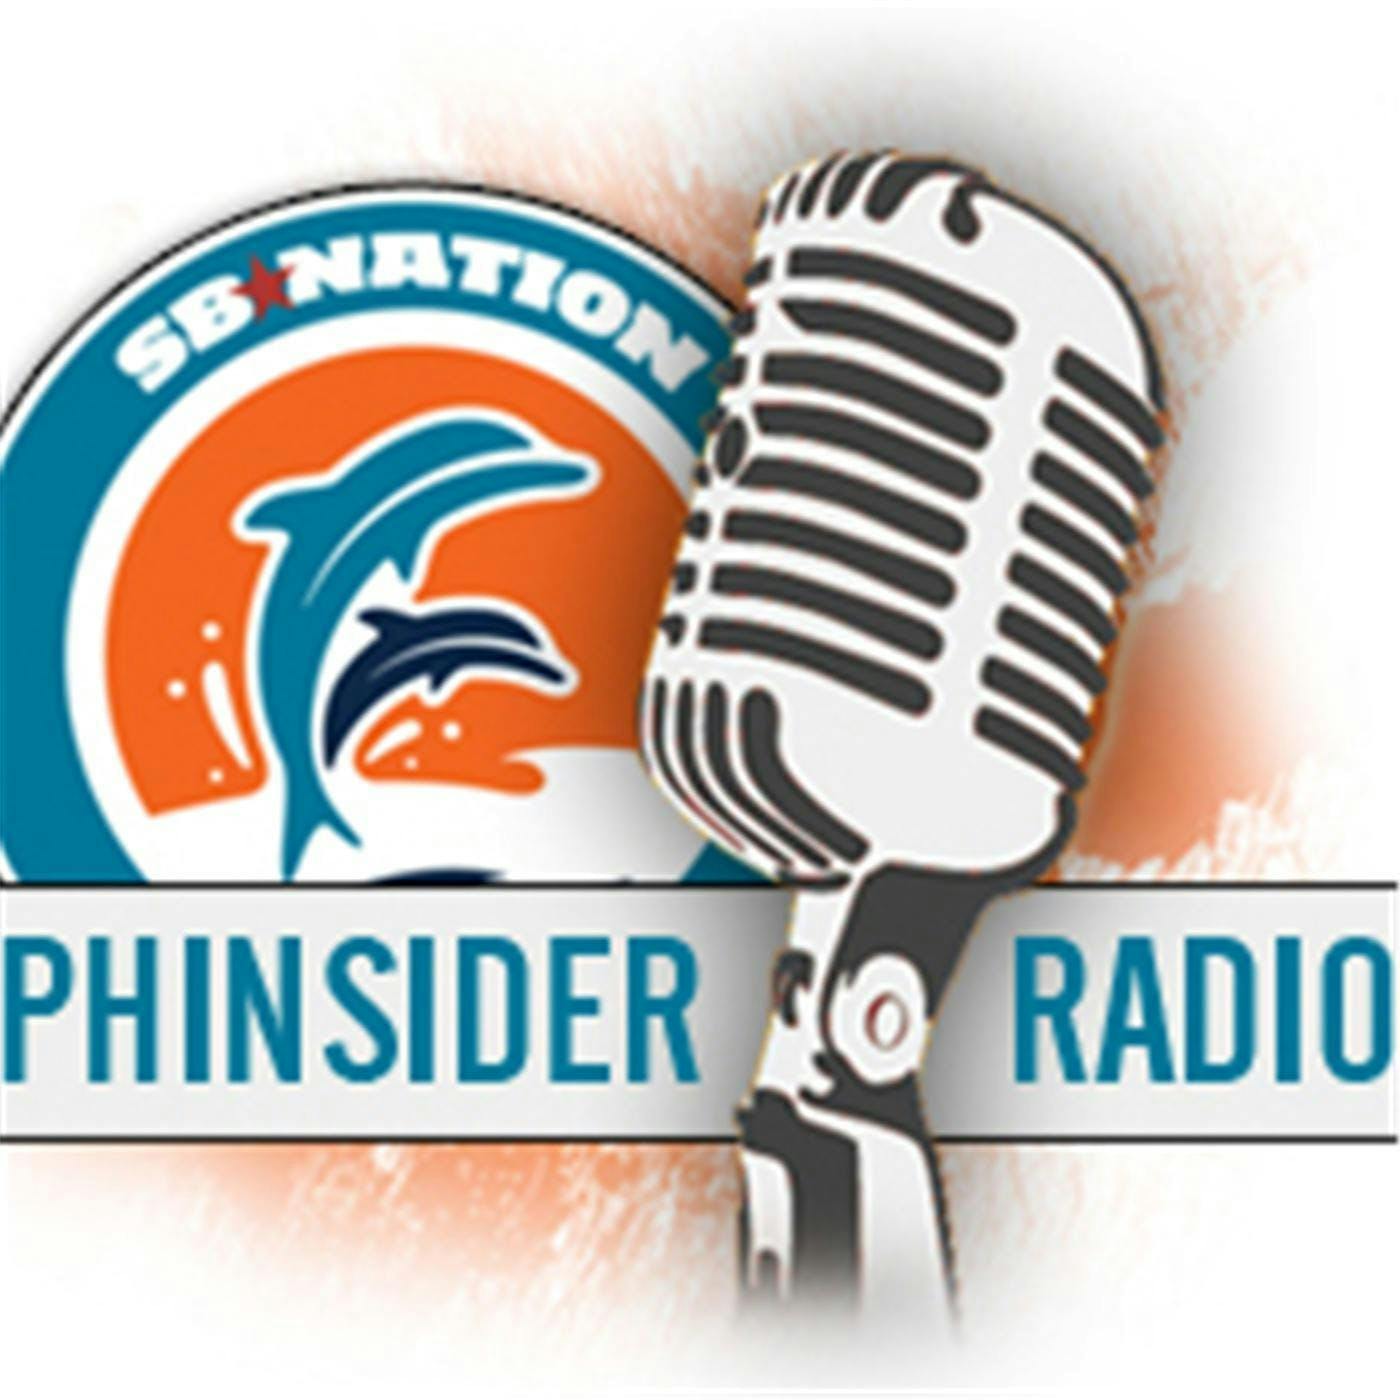 Phinsider Radio - Franchise Tags, Combines, and Bullying Reports